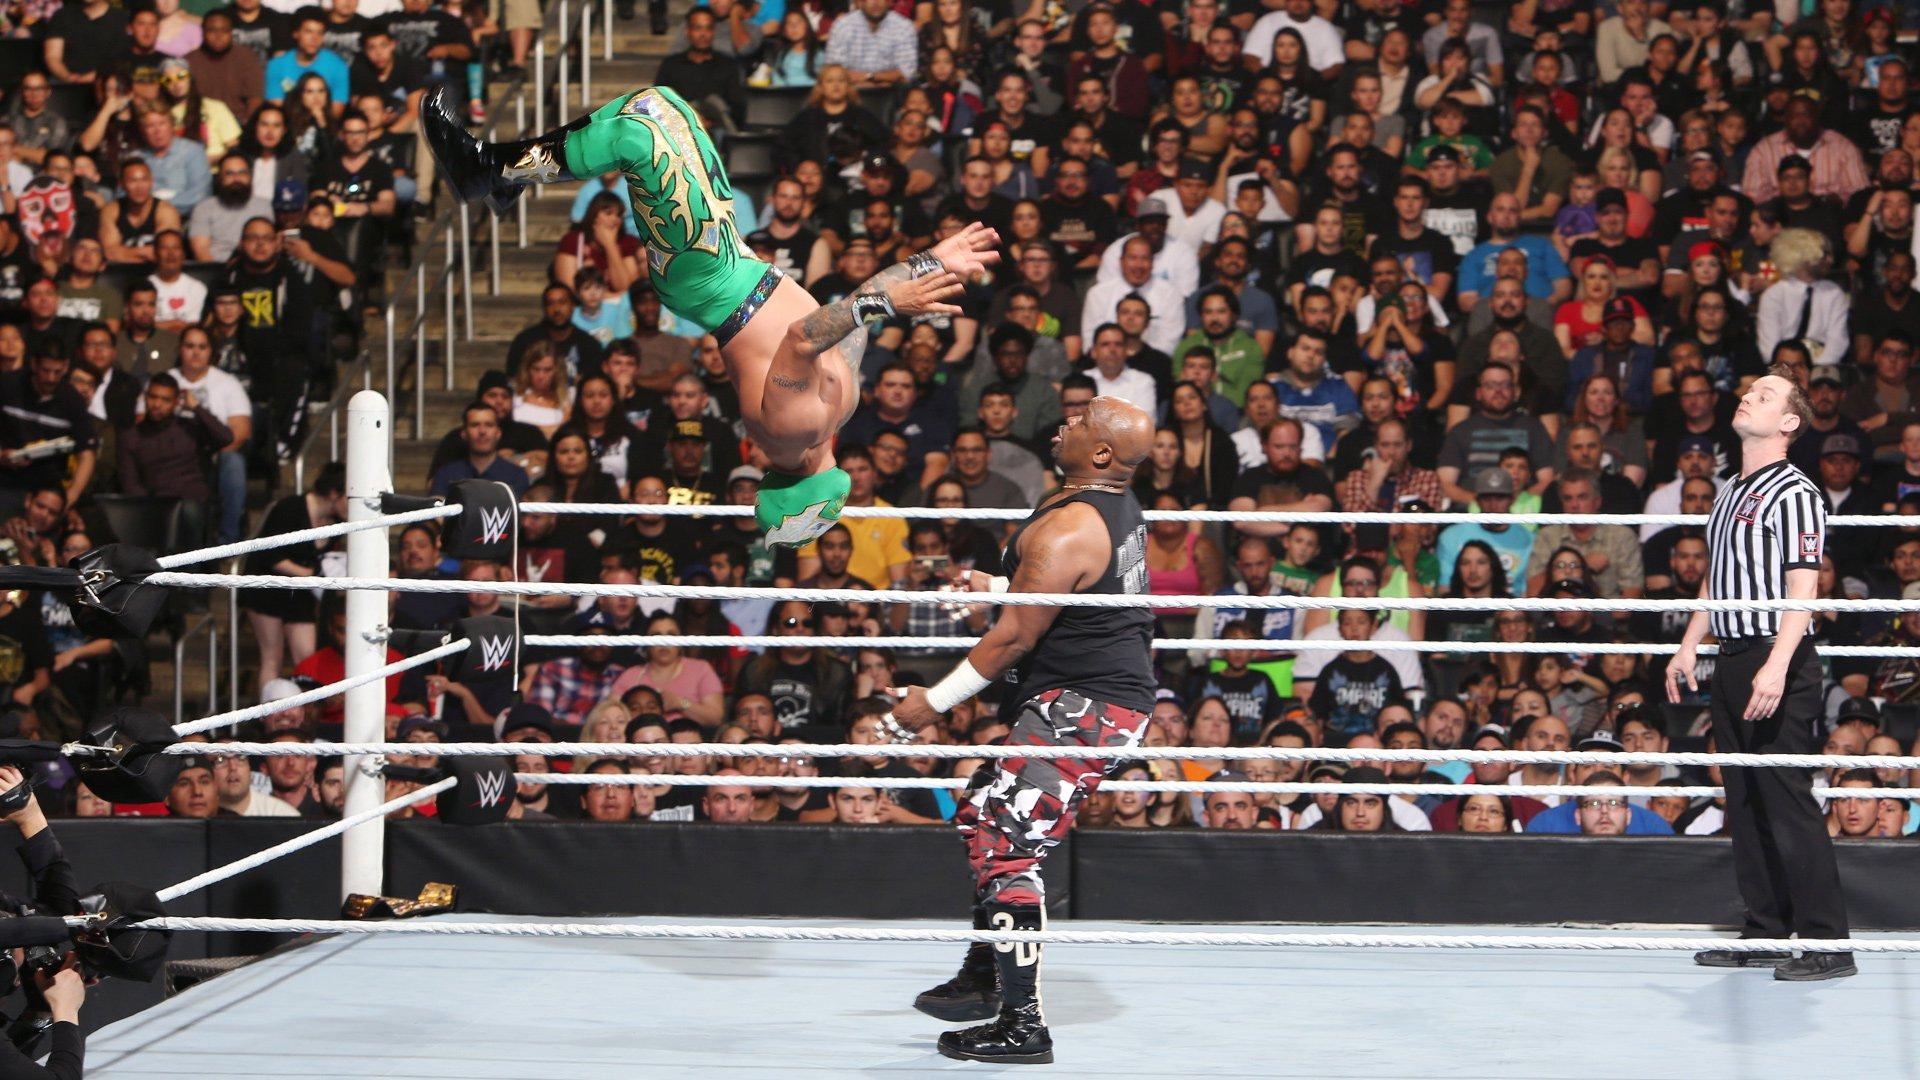 The Lucha Dragons vs. The Dudley Boyz. 1 Contenders' Tag Team